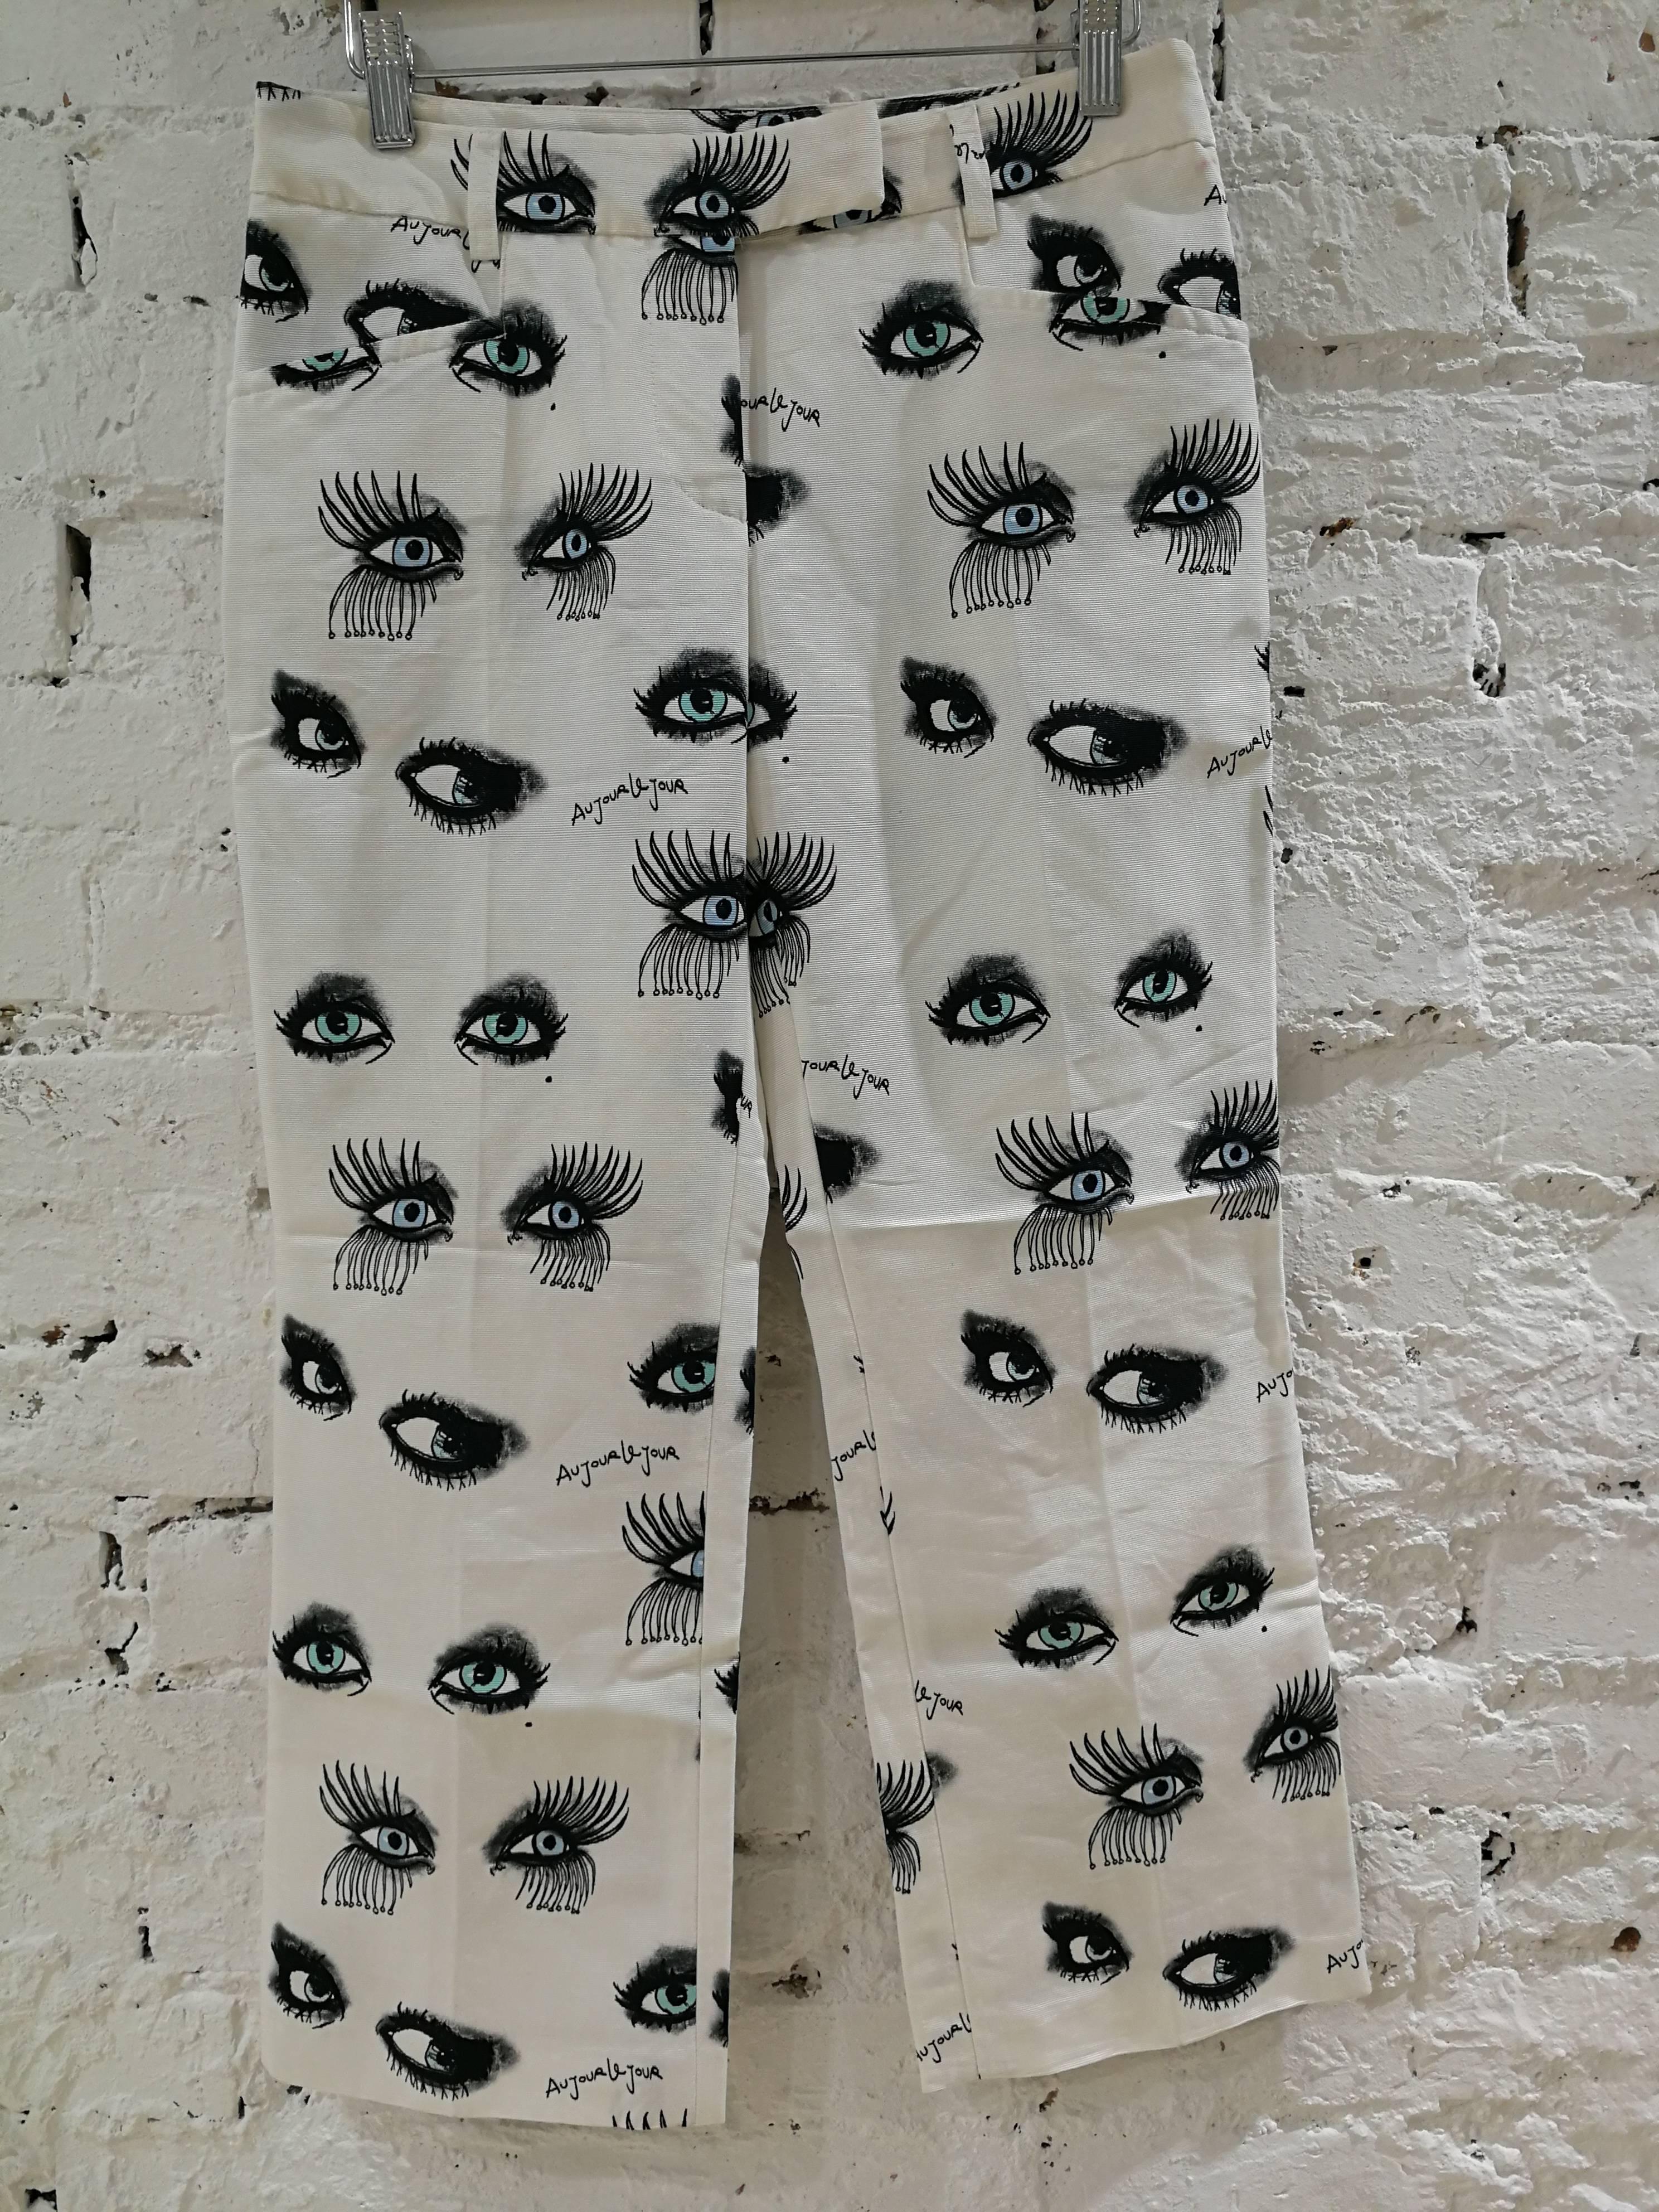 Au Jour le Jour white Eyes Trousers

Totally made in italy with eyes all over

Size: 42

composition: Cotton

Total lenght: 83 cm

Waist: 74 cm
